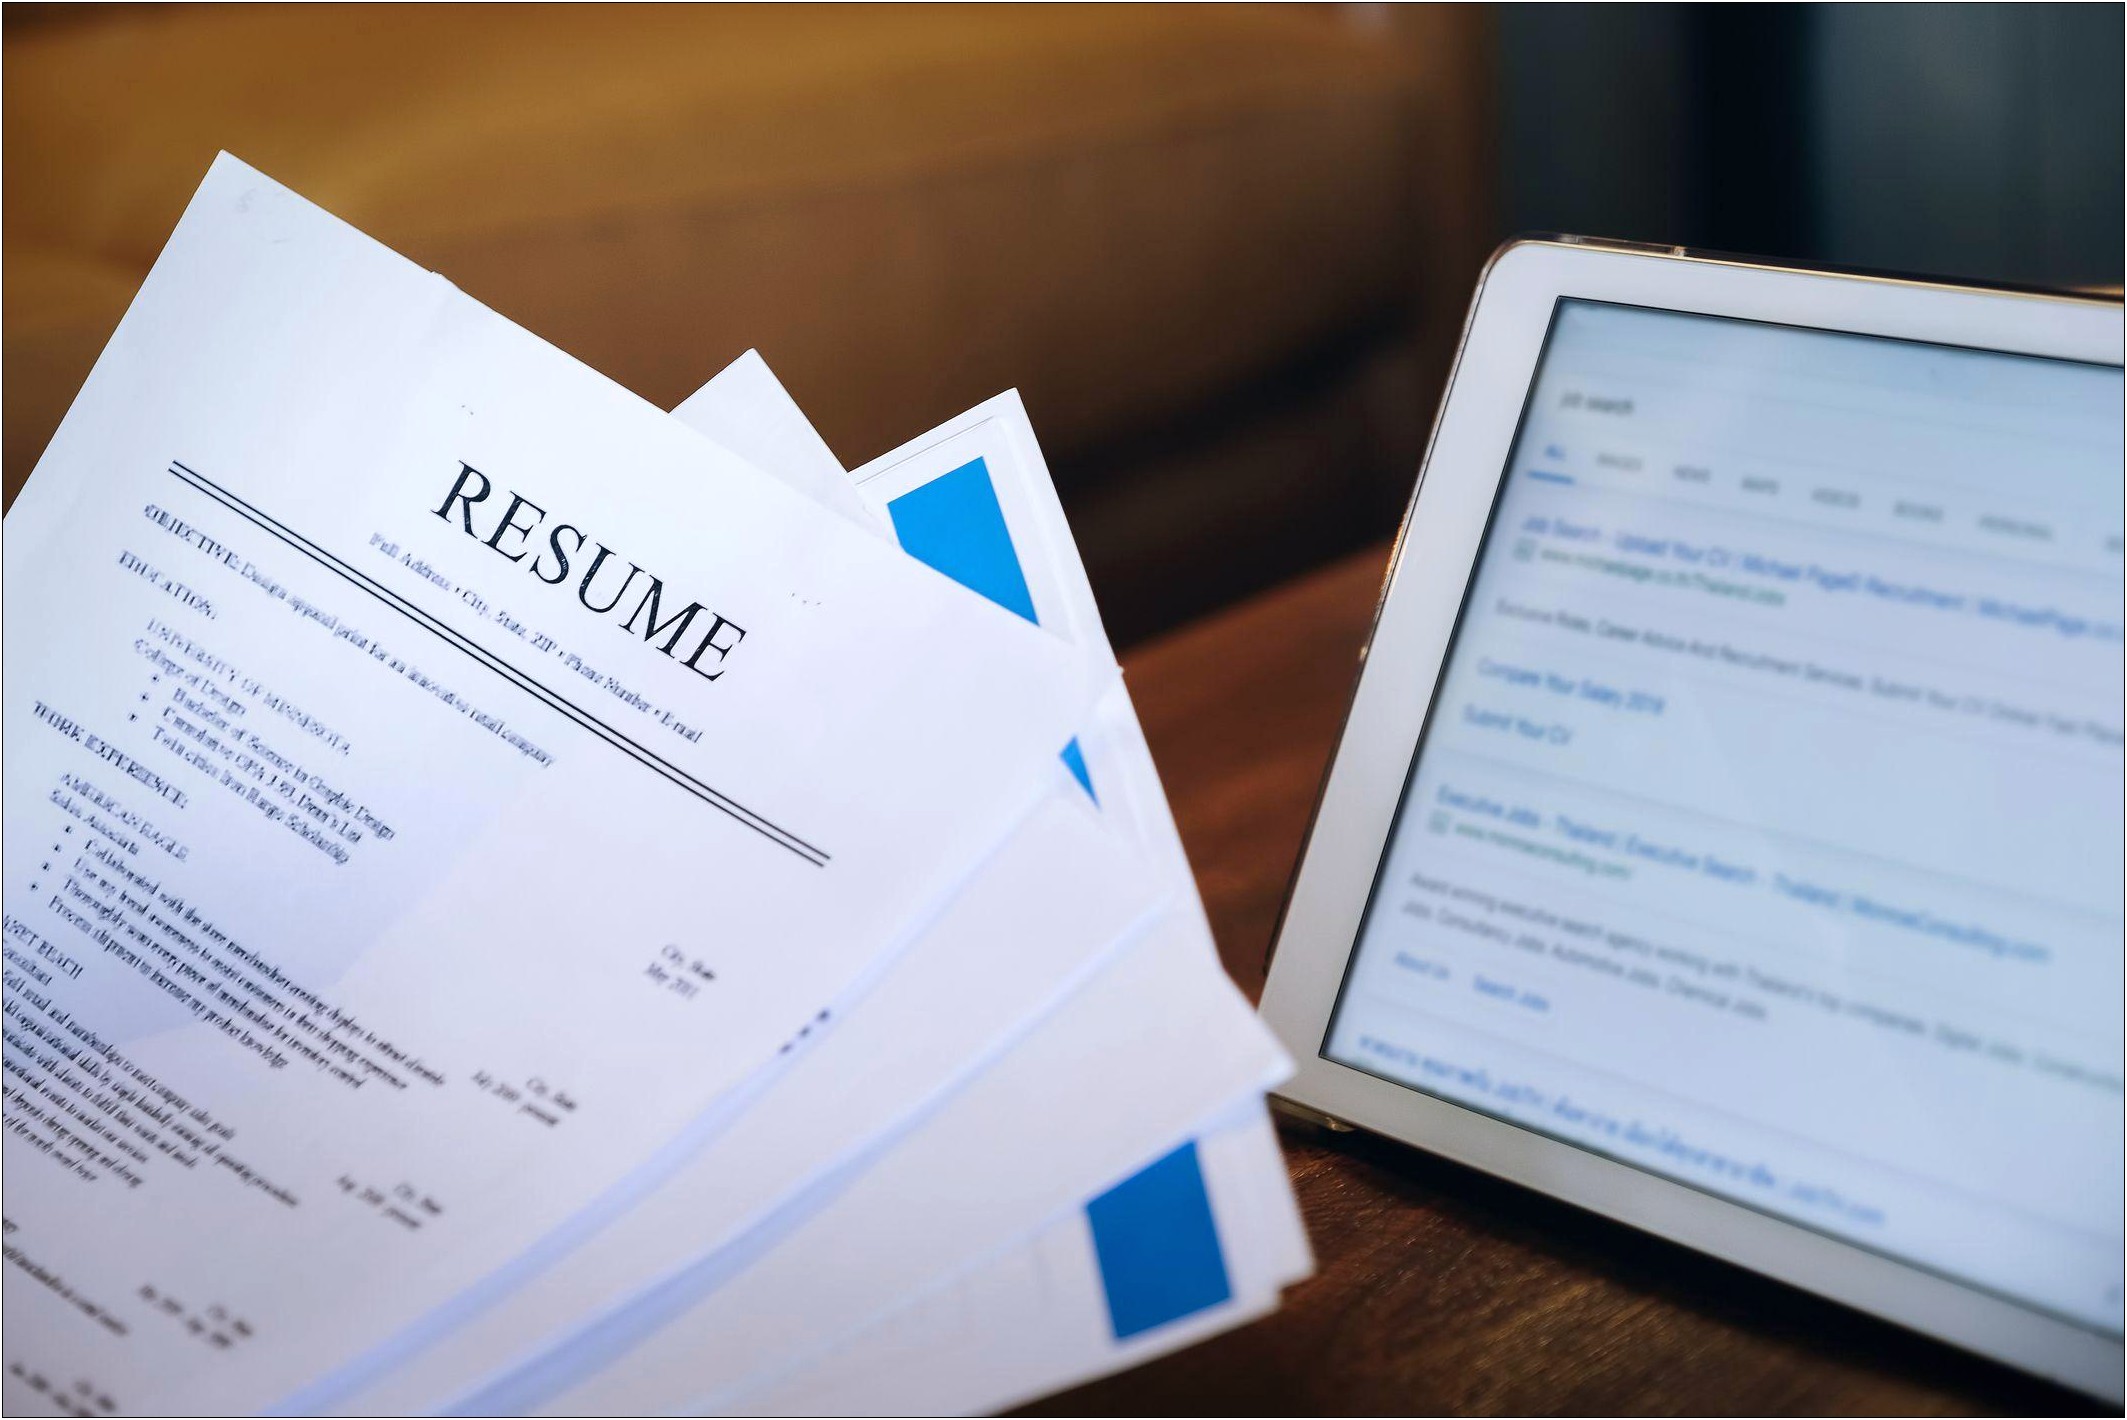 Putting Company Name In Your Resume File Name